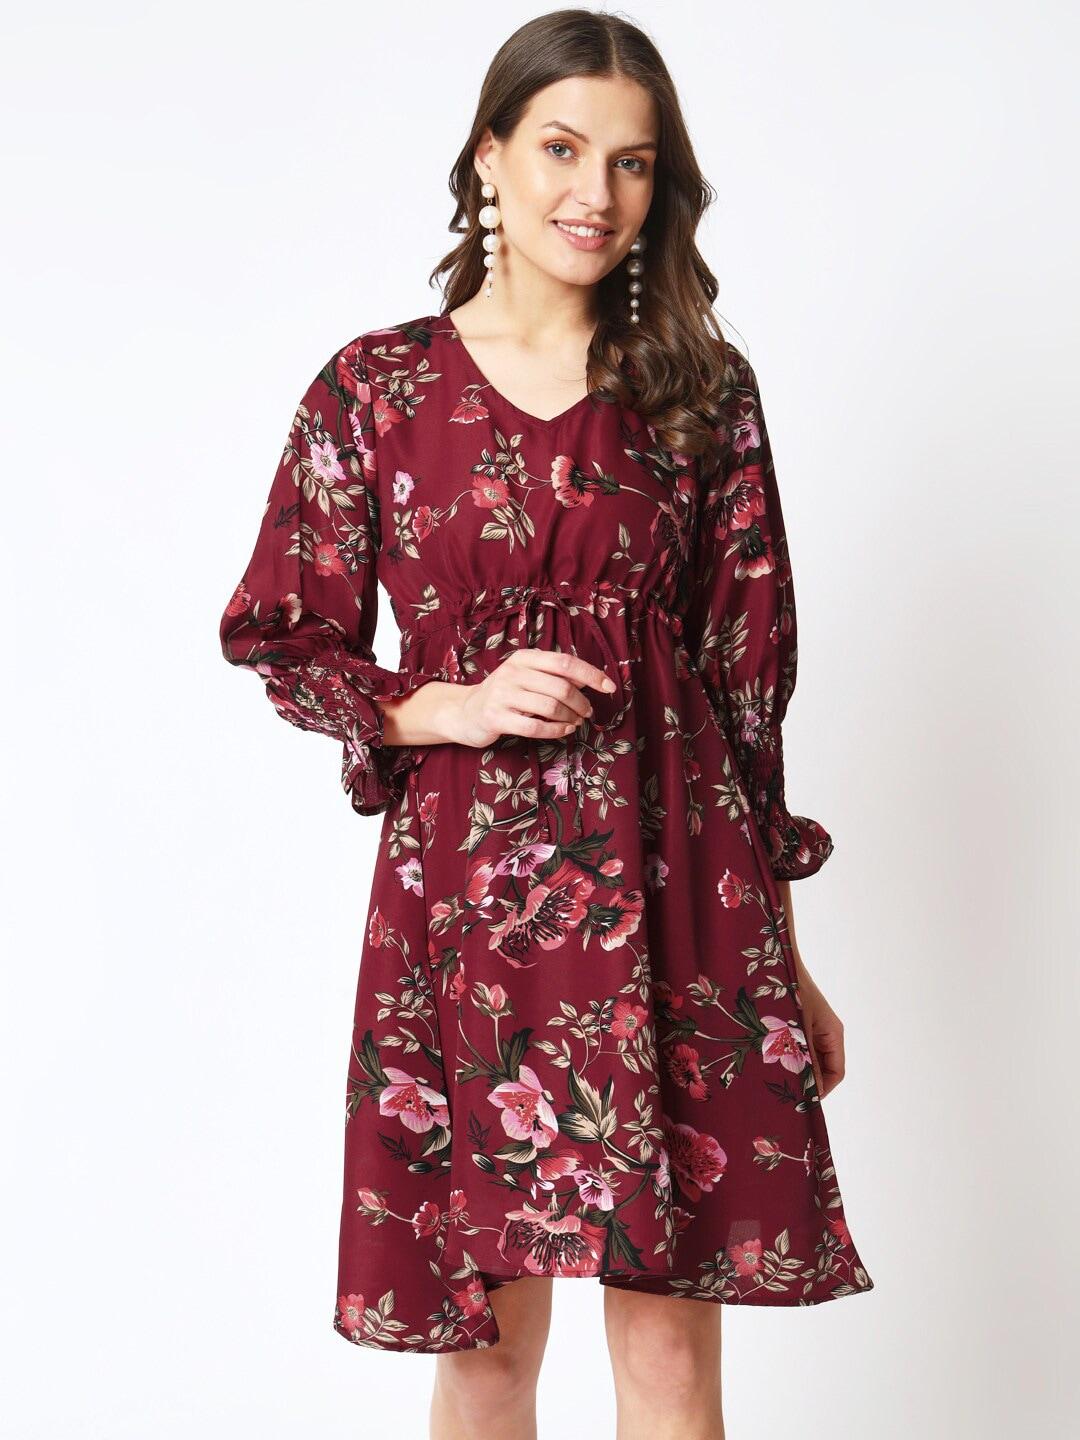 cuffs-n-lashes-maroon-floral-print-puff-sleeve-fit-&-flare-dress